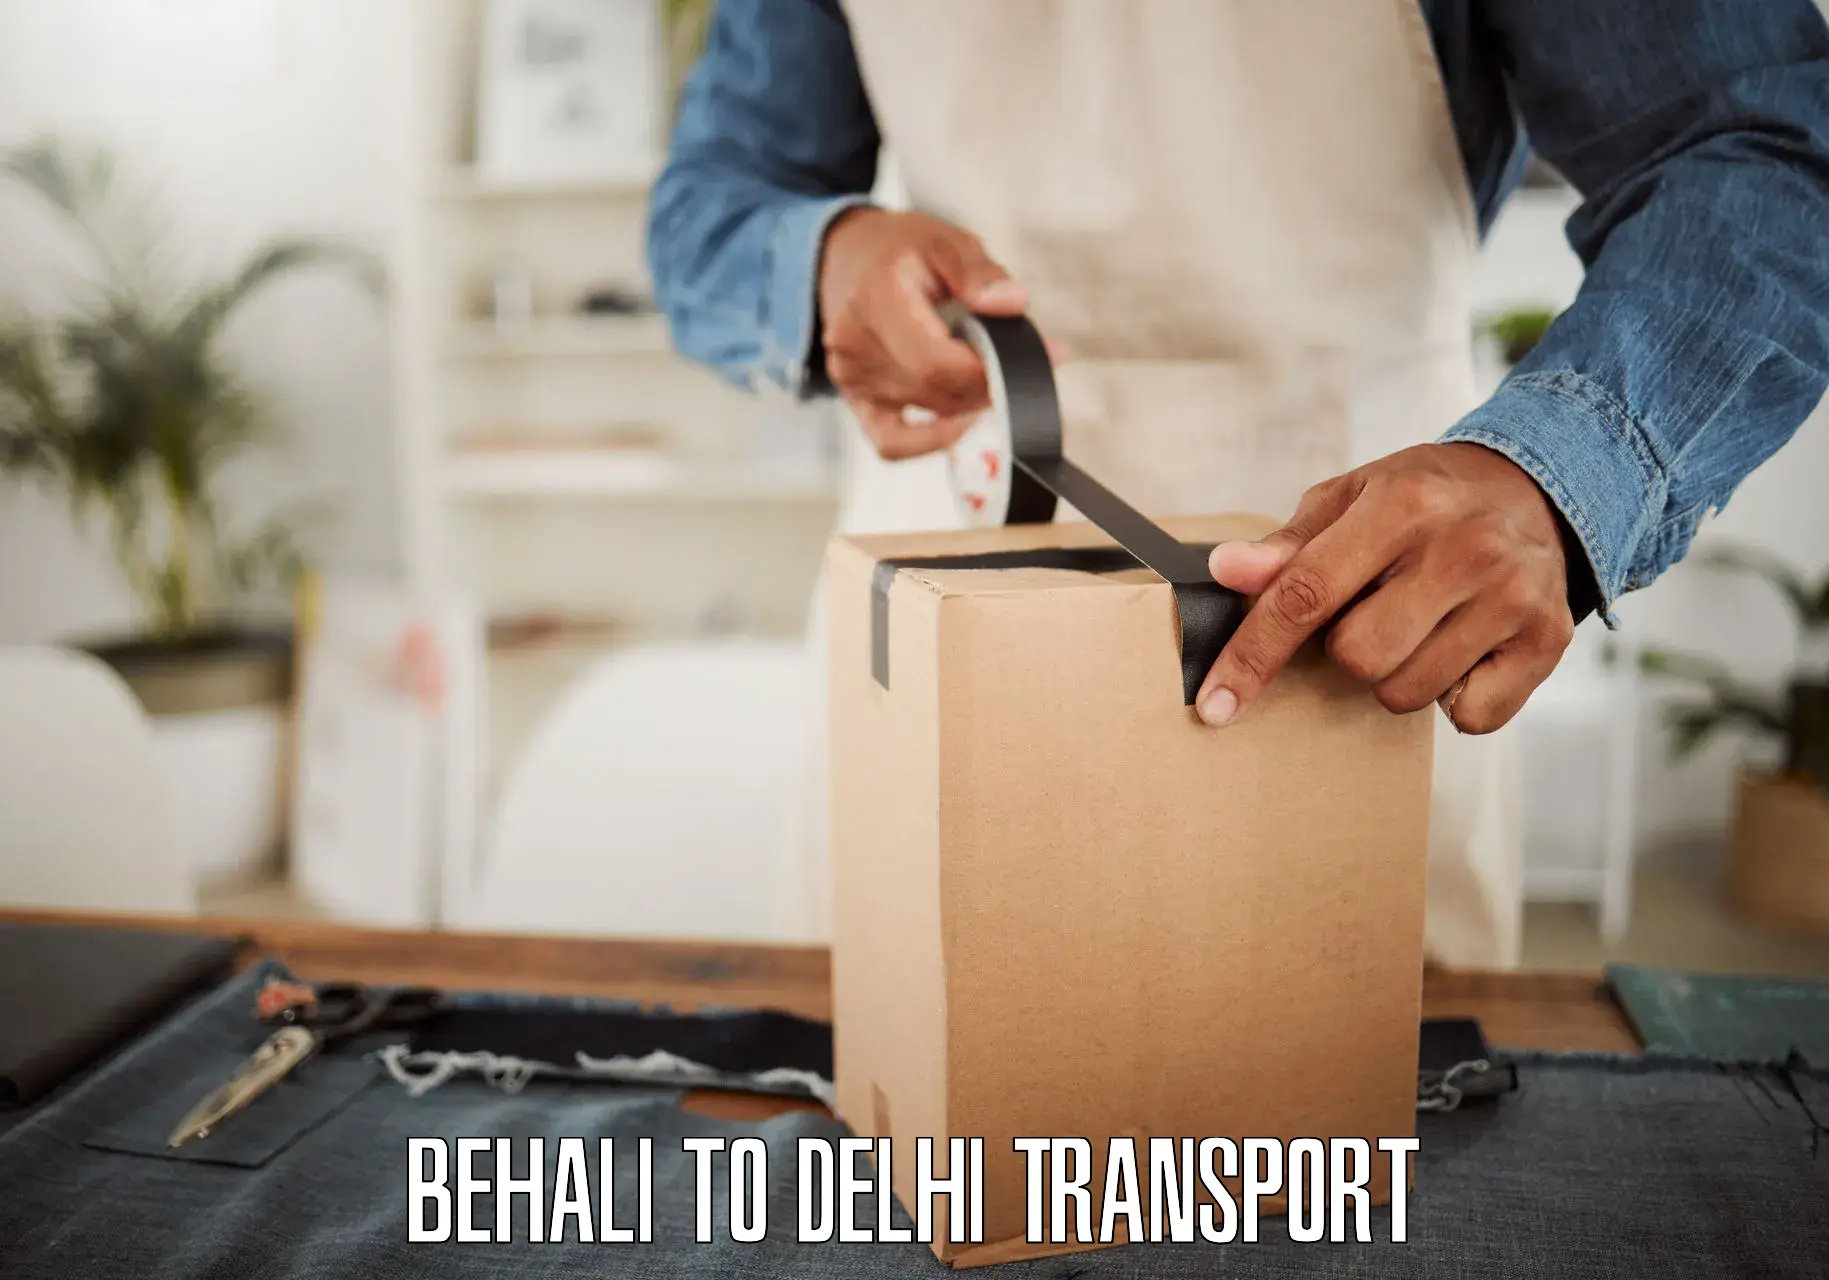 Truck transport companies in India Behali to NCR